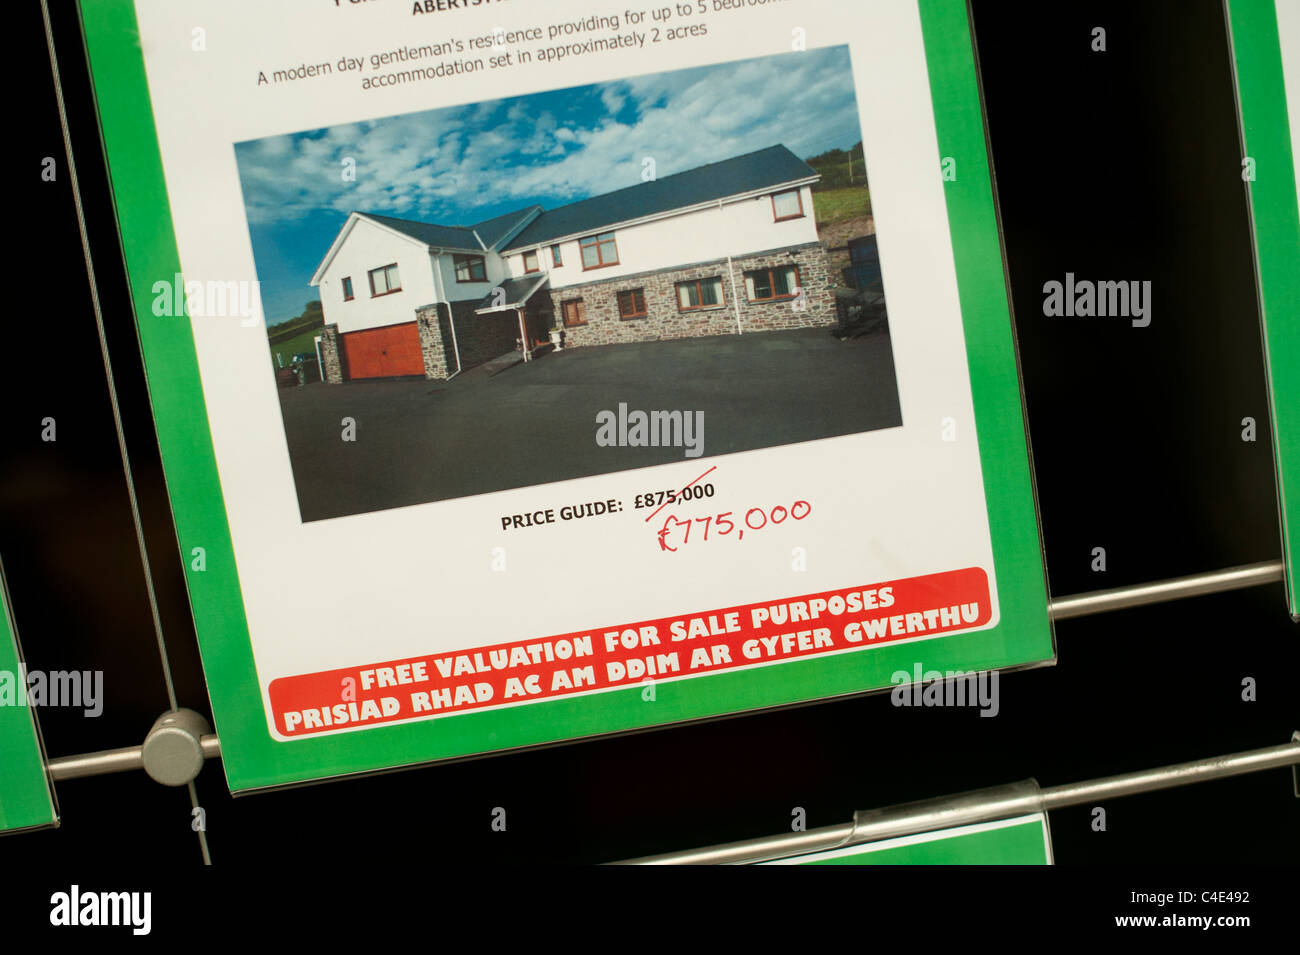 Details of a £100,000 Price reduction on a luxury detached house in an estate agents window. Wales UK Stock Photo